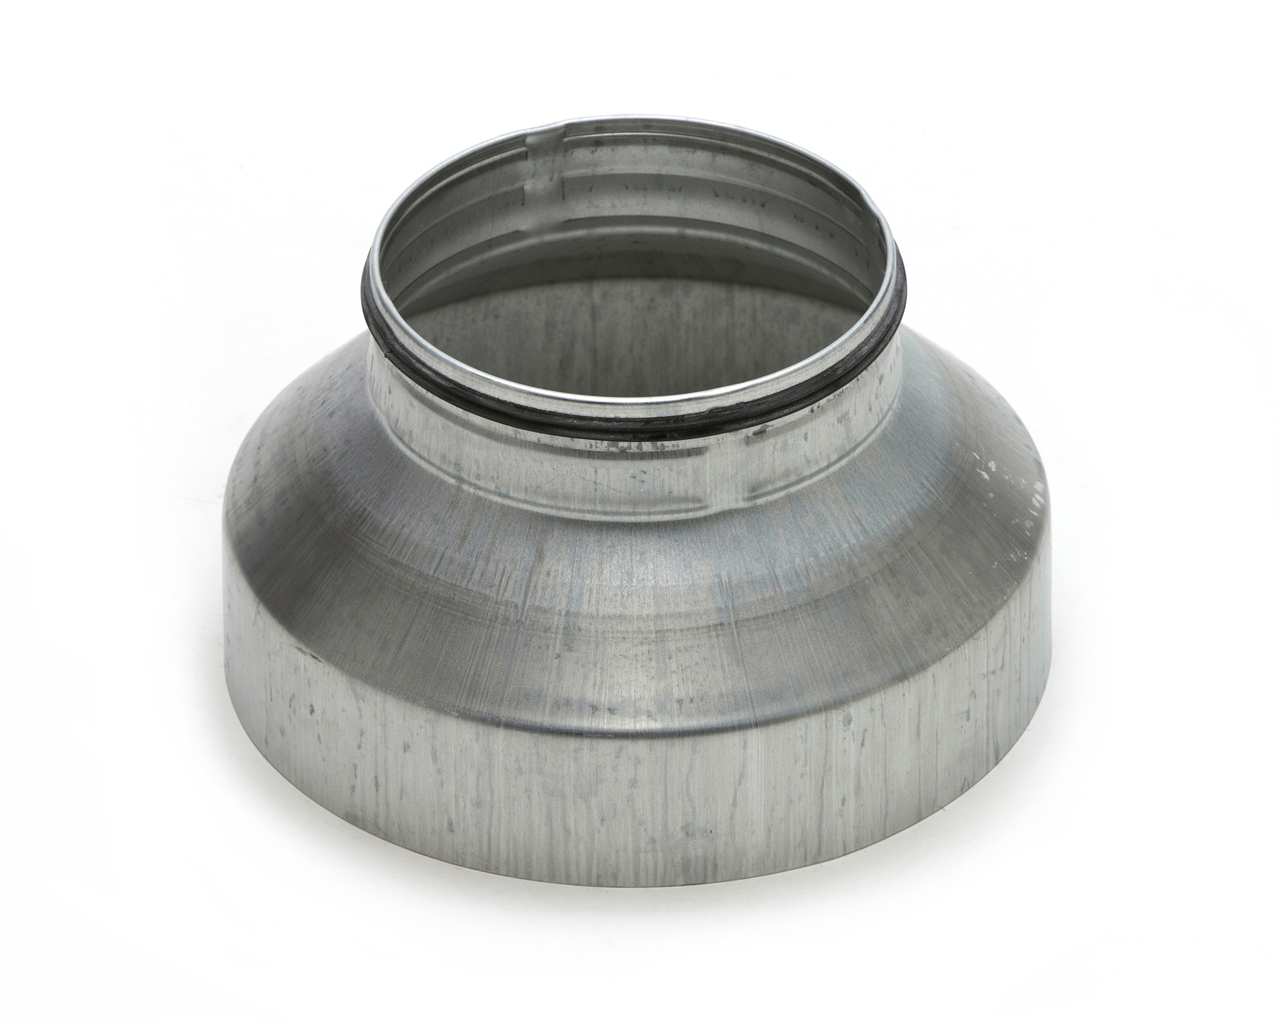 GVH010.008K Pressed reducer male/female KEN-LOK (GVH) The largest end of the GVH Pressed reducer fits over a fitting and the smallest fits into a Spiralo duct. This allows another large fitting of the same diameter to be installed directly onto the reducer.